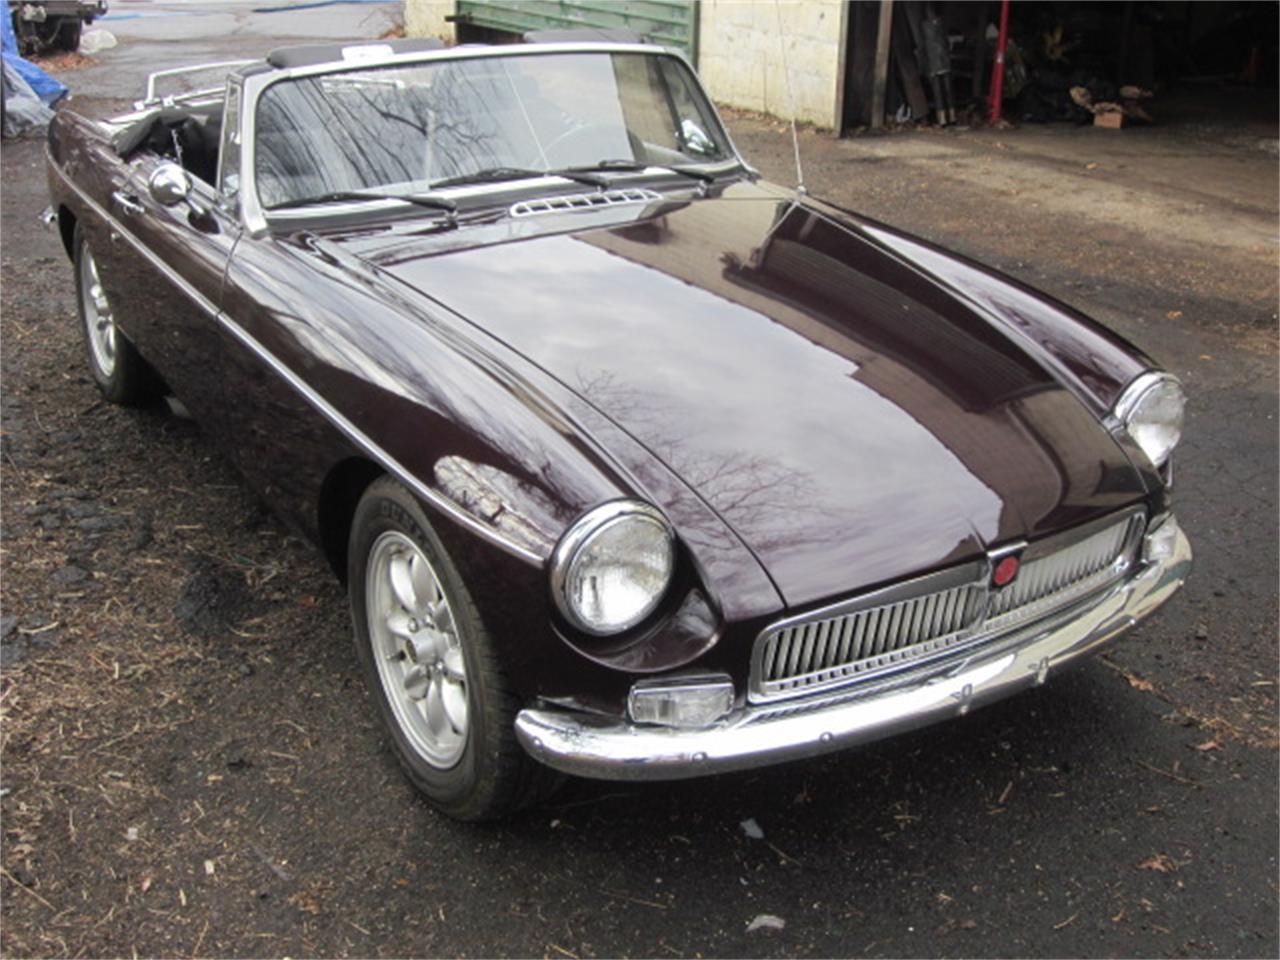 1980 MG MGB for sale in Stratford, CT – photo 2